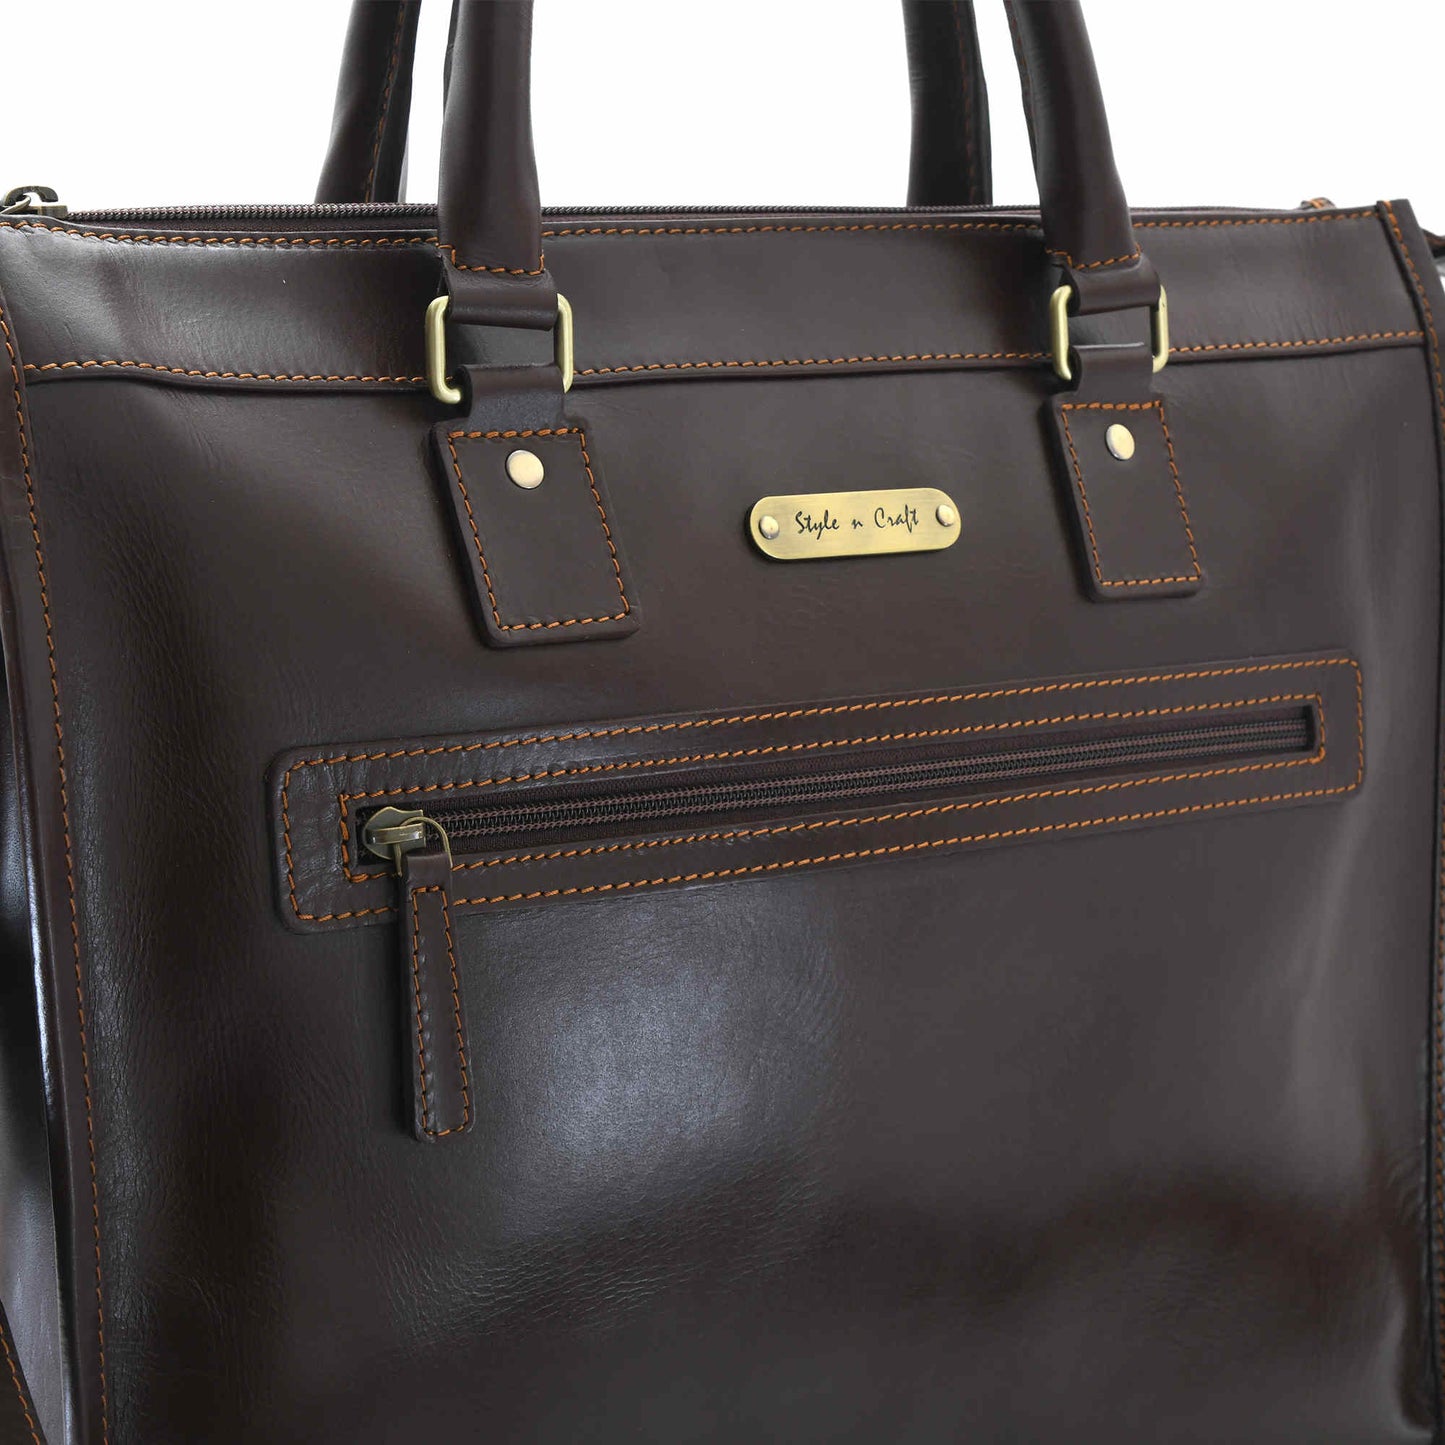 Style n Craft 392008 Men's Portfolio Briefcase Bag in Full Grain Dark Brown Leather - Front Profile View showing the Zippered Pocket & the Logo